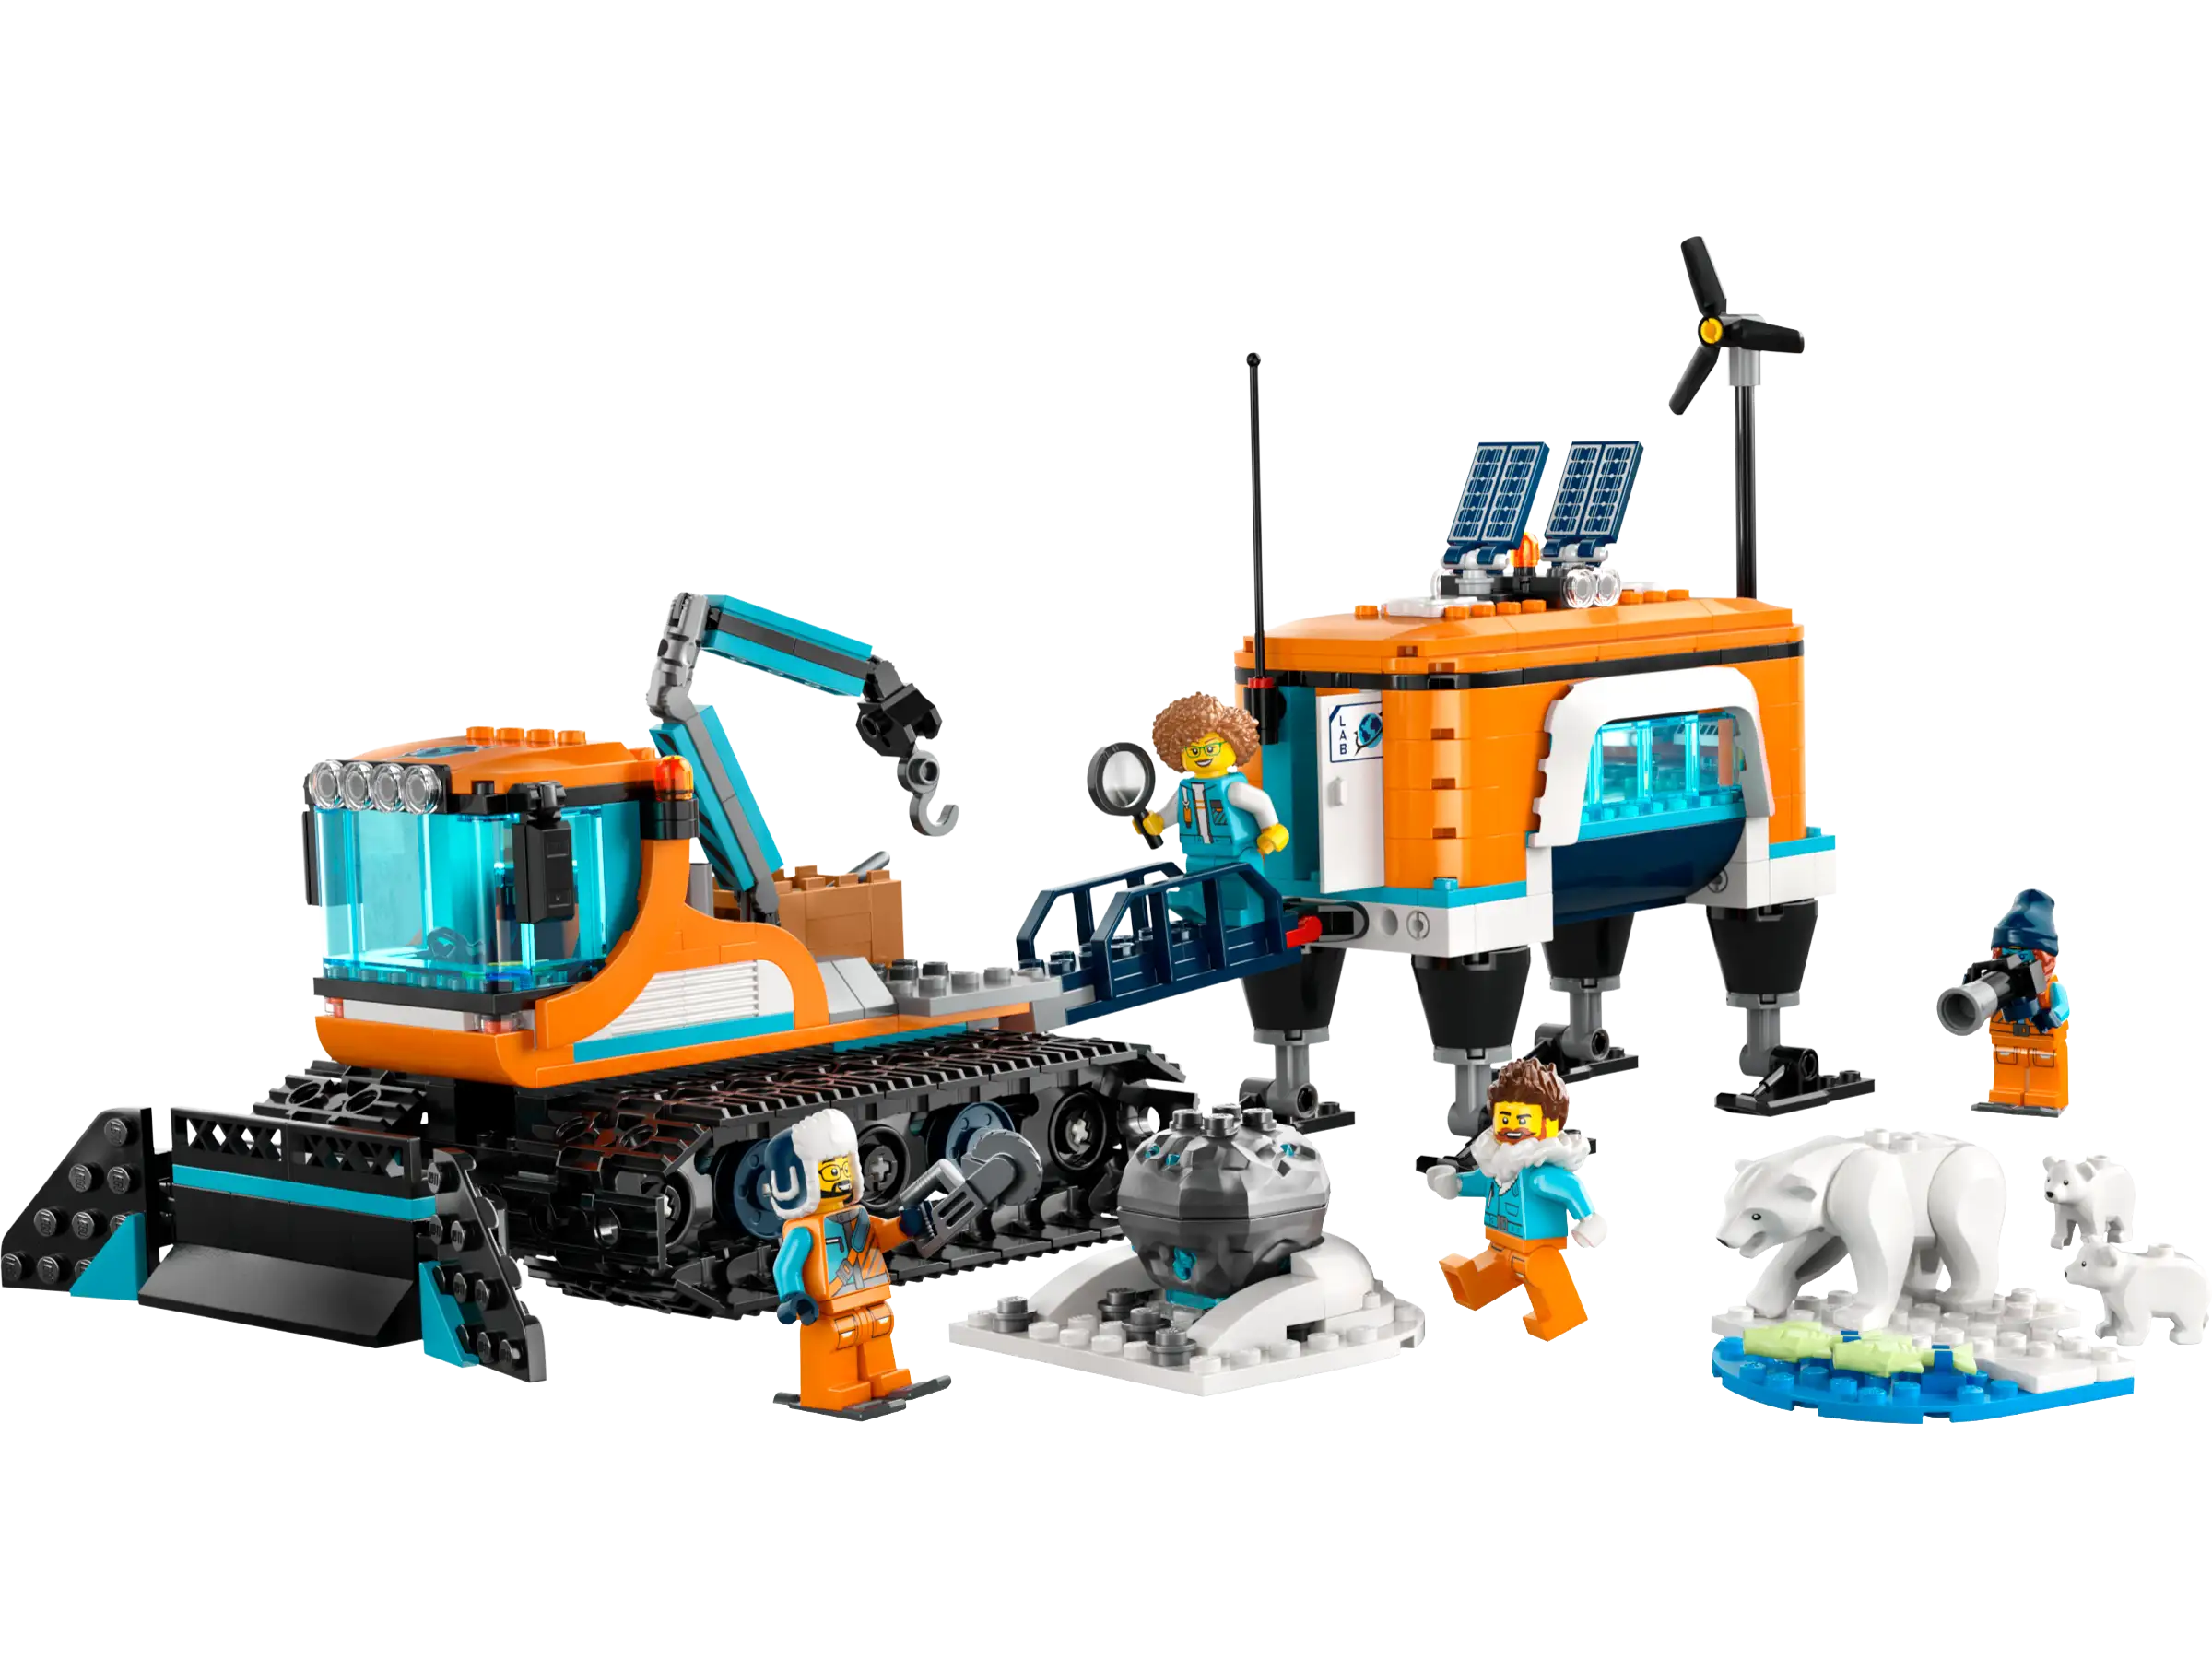 Lego - The truck and the mobile arctic exploration lab